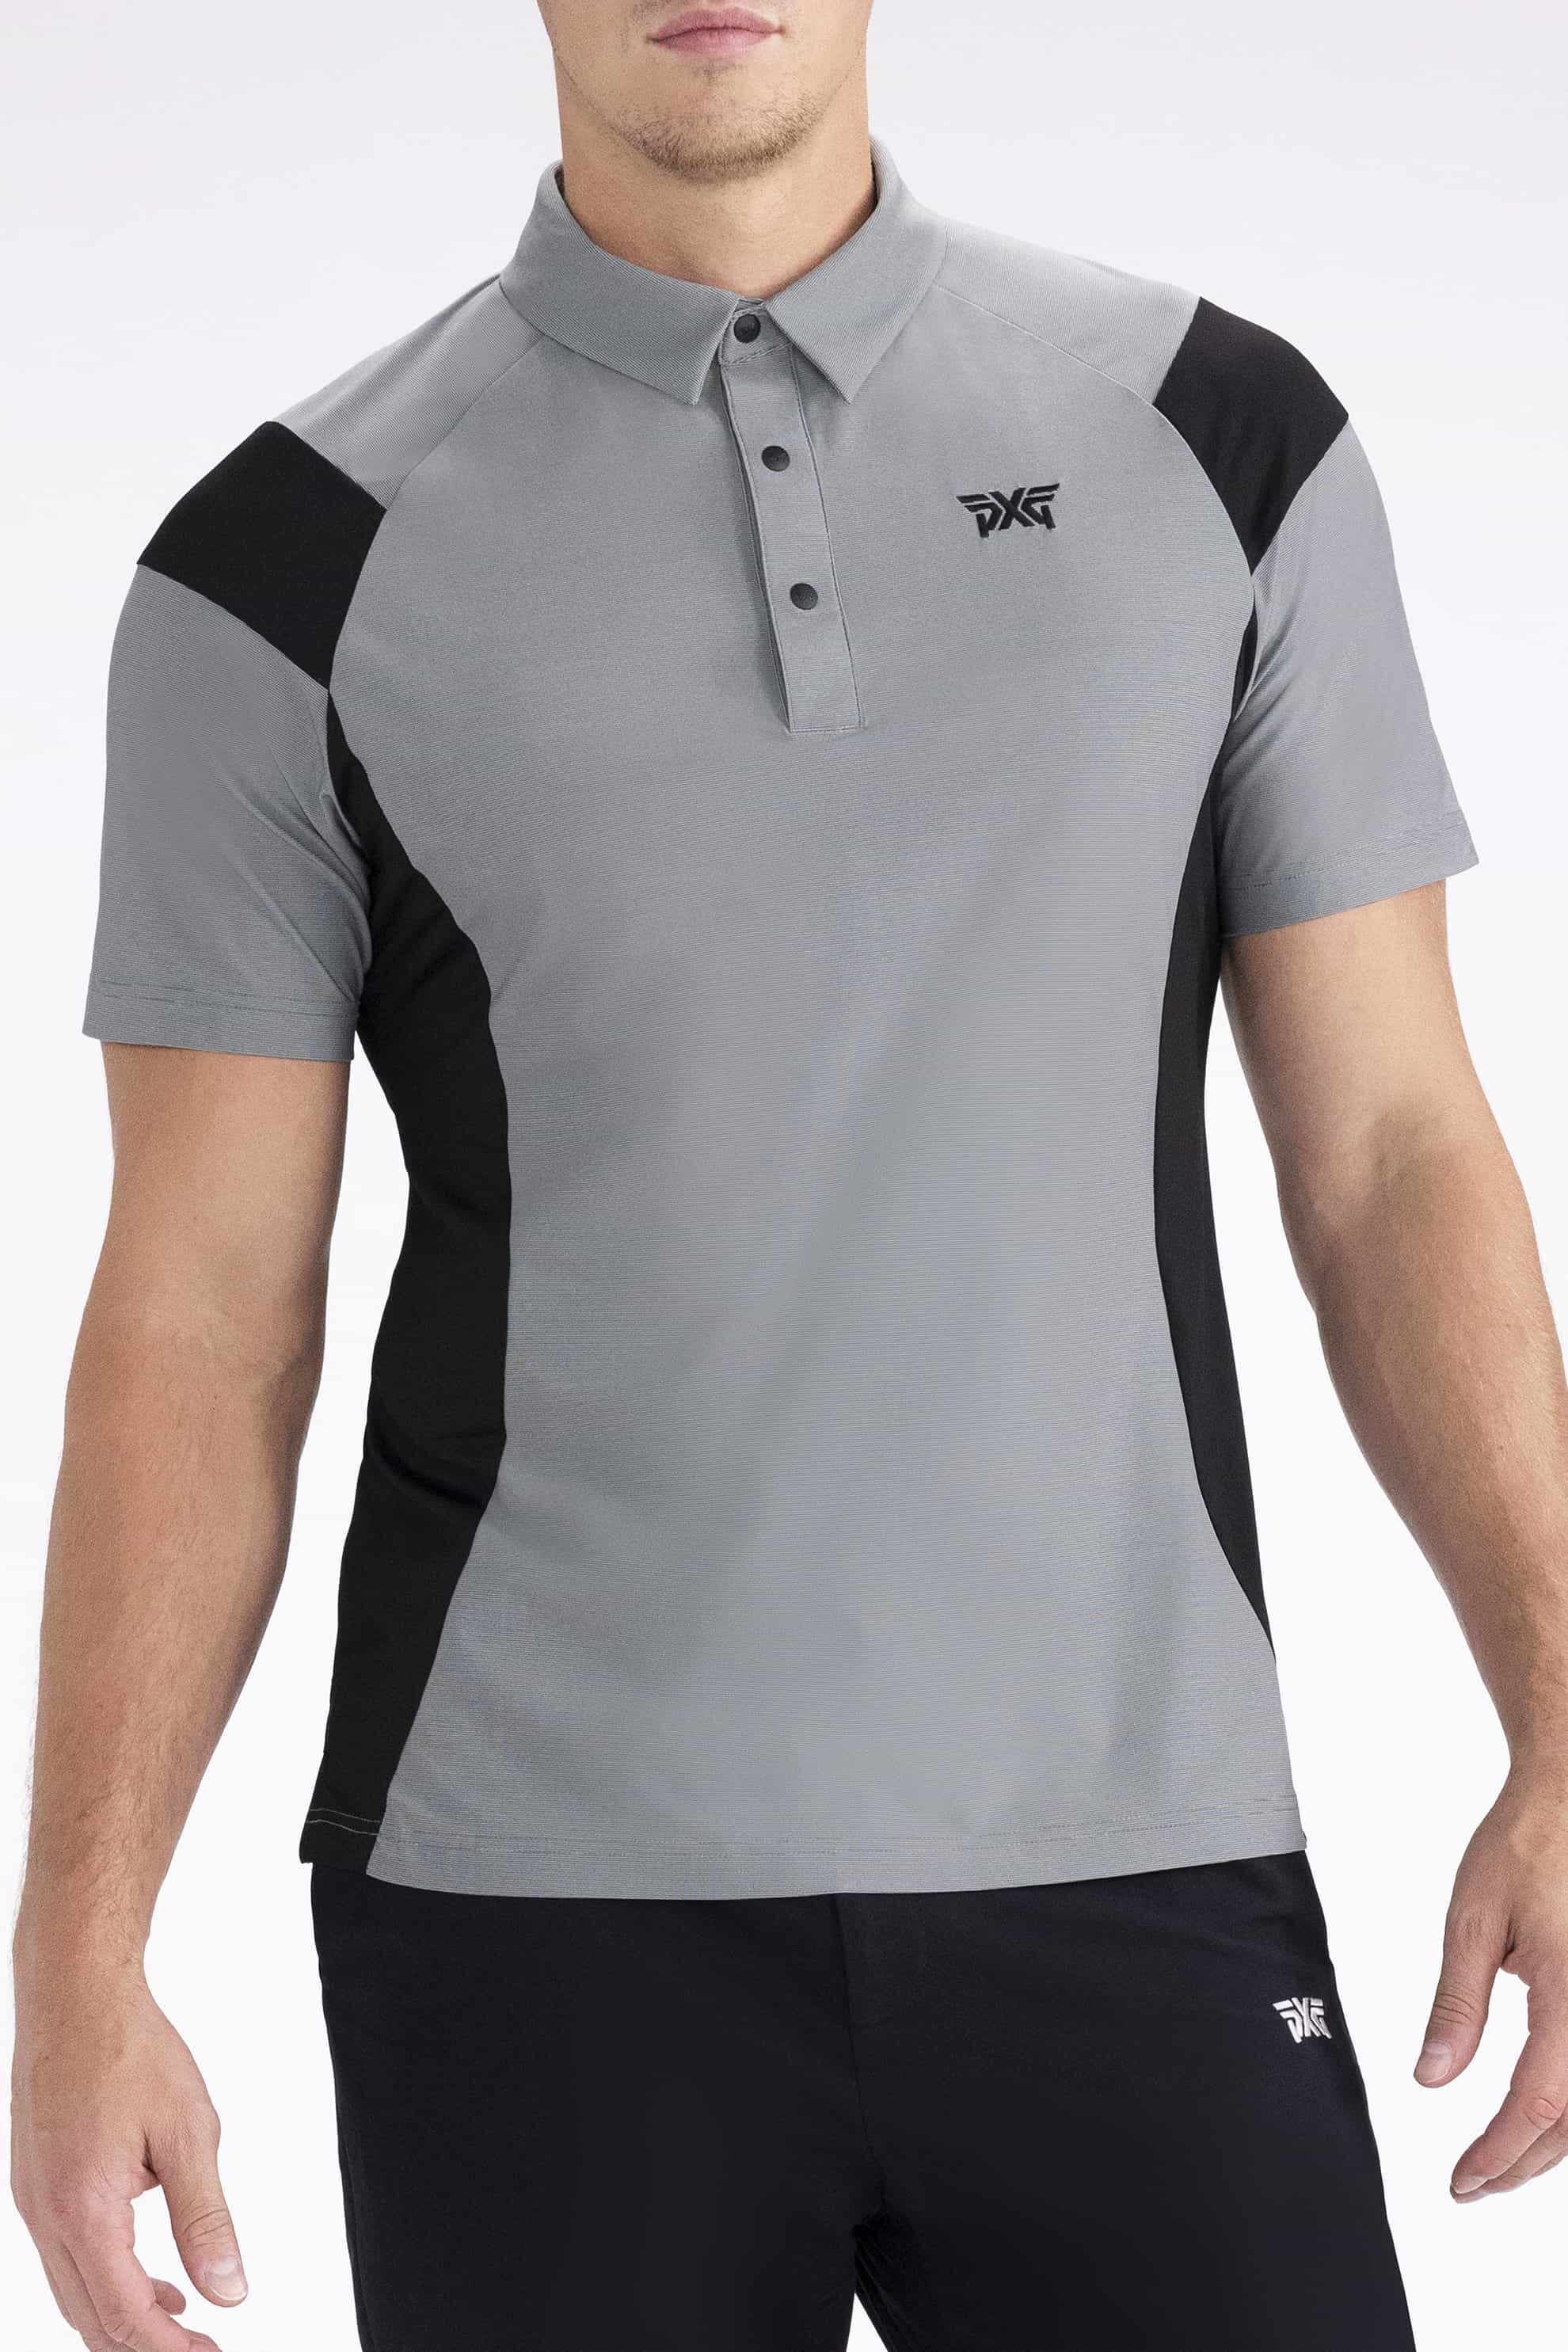 Athletic Fit Contour Paneled Polo | Shop the Highest Quality Golf ...